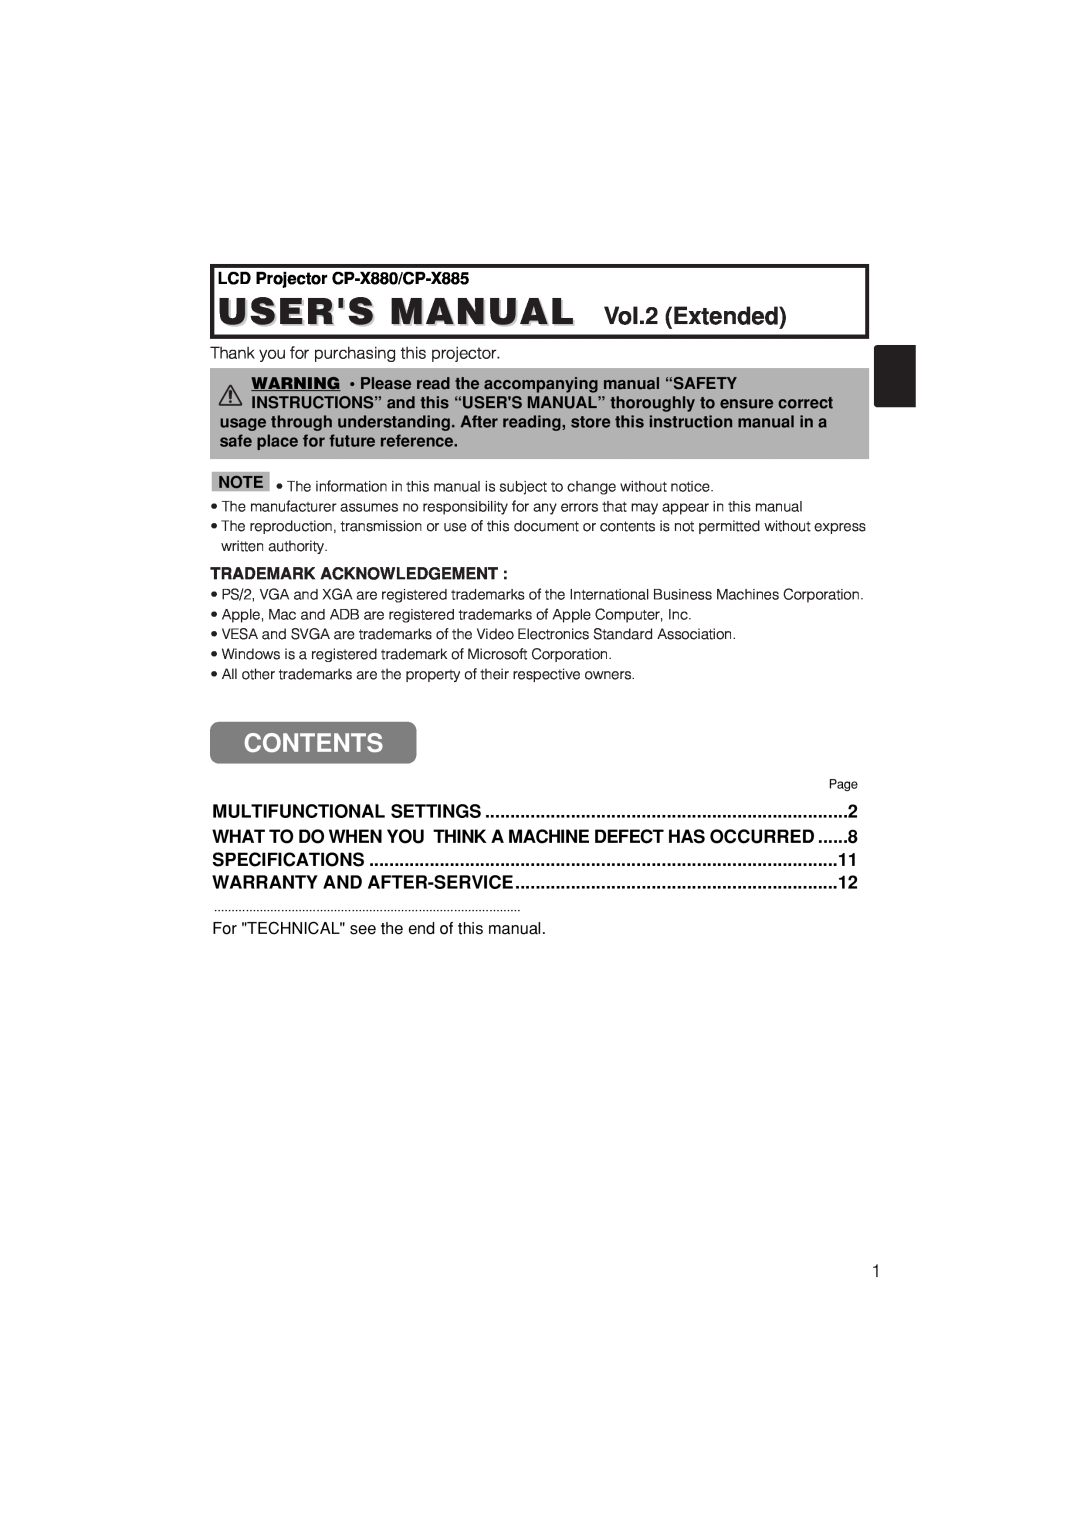 Hitachi CP-X885W, CP-X880W user manual Contents, USERS MANUAL Vol.2 Extended 